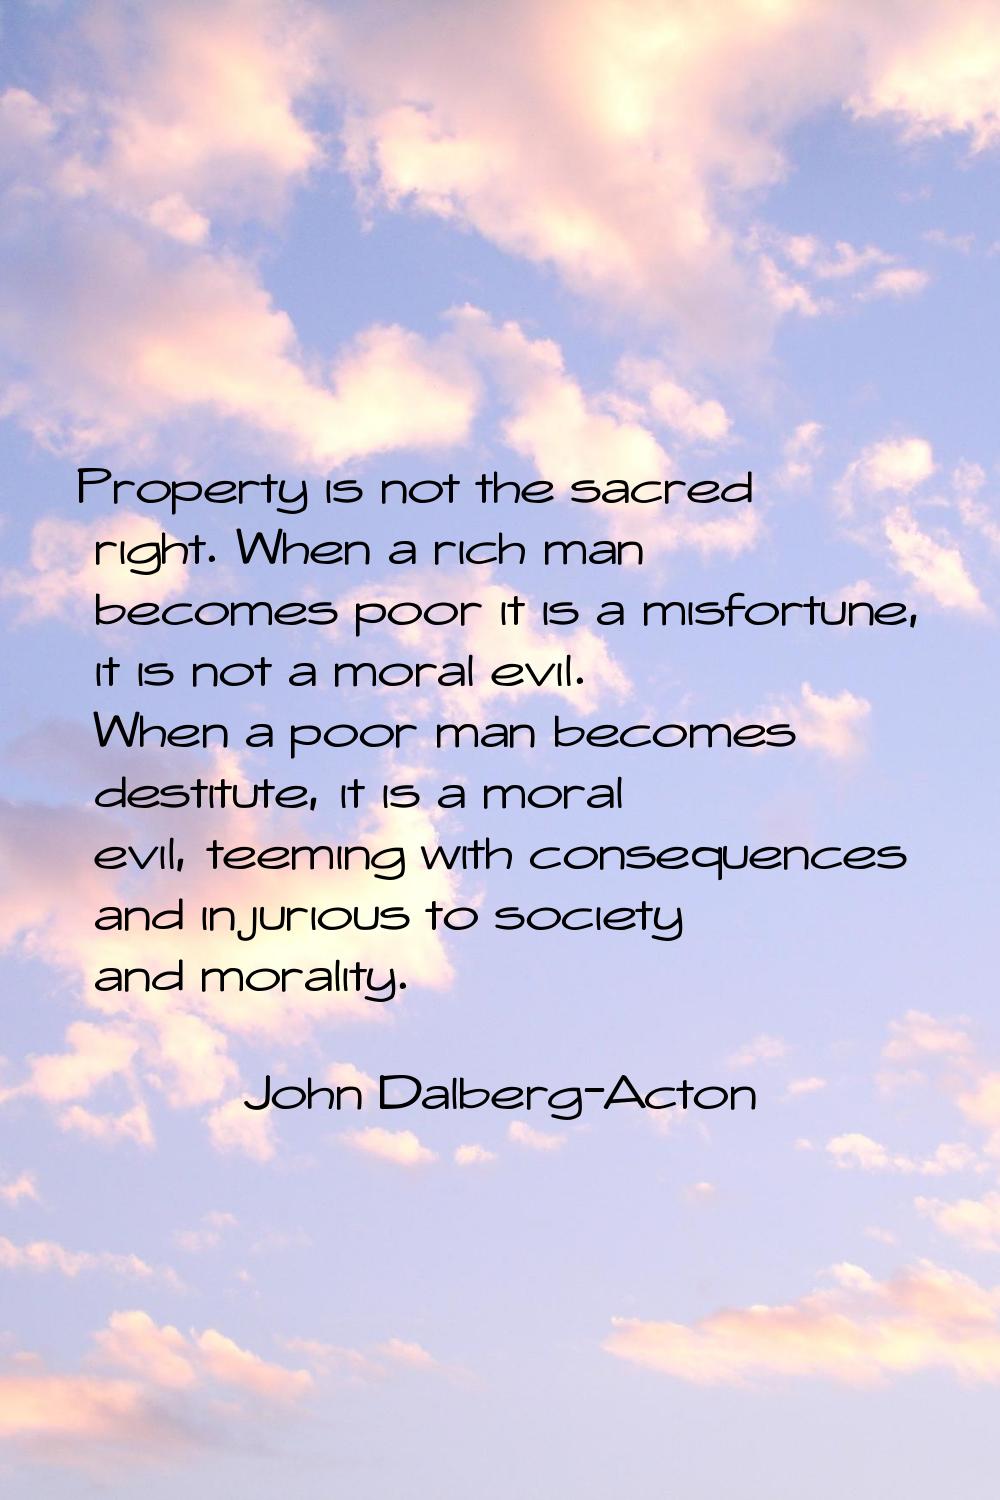 Property is not the sacred right. When a rich man becomes poor it is a misfortune, it is not a mora